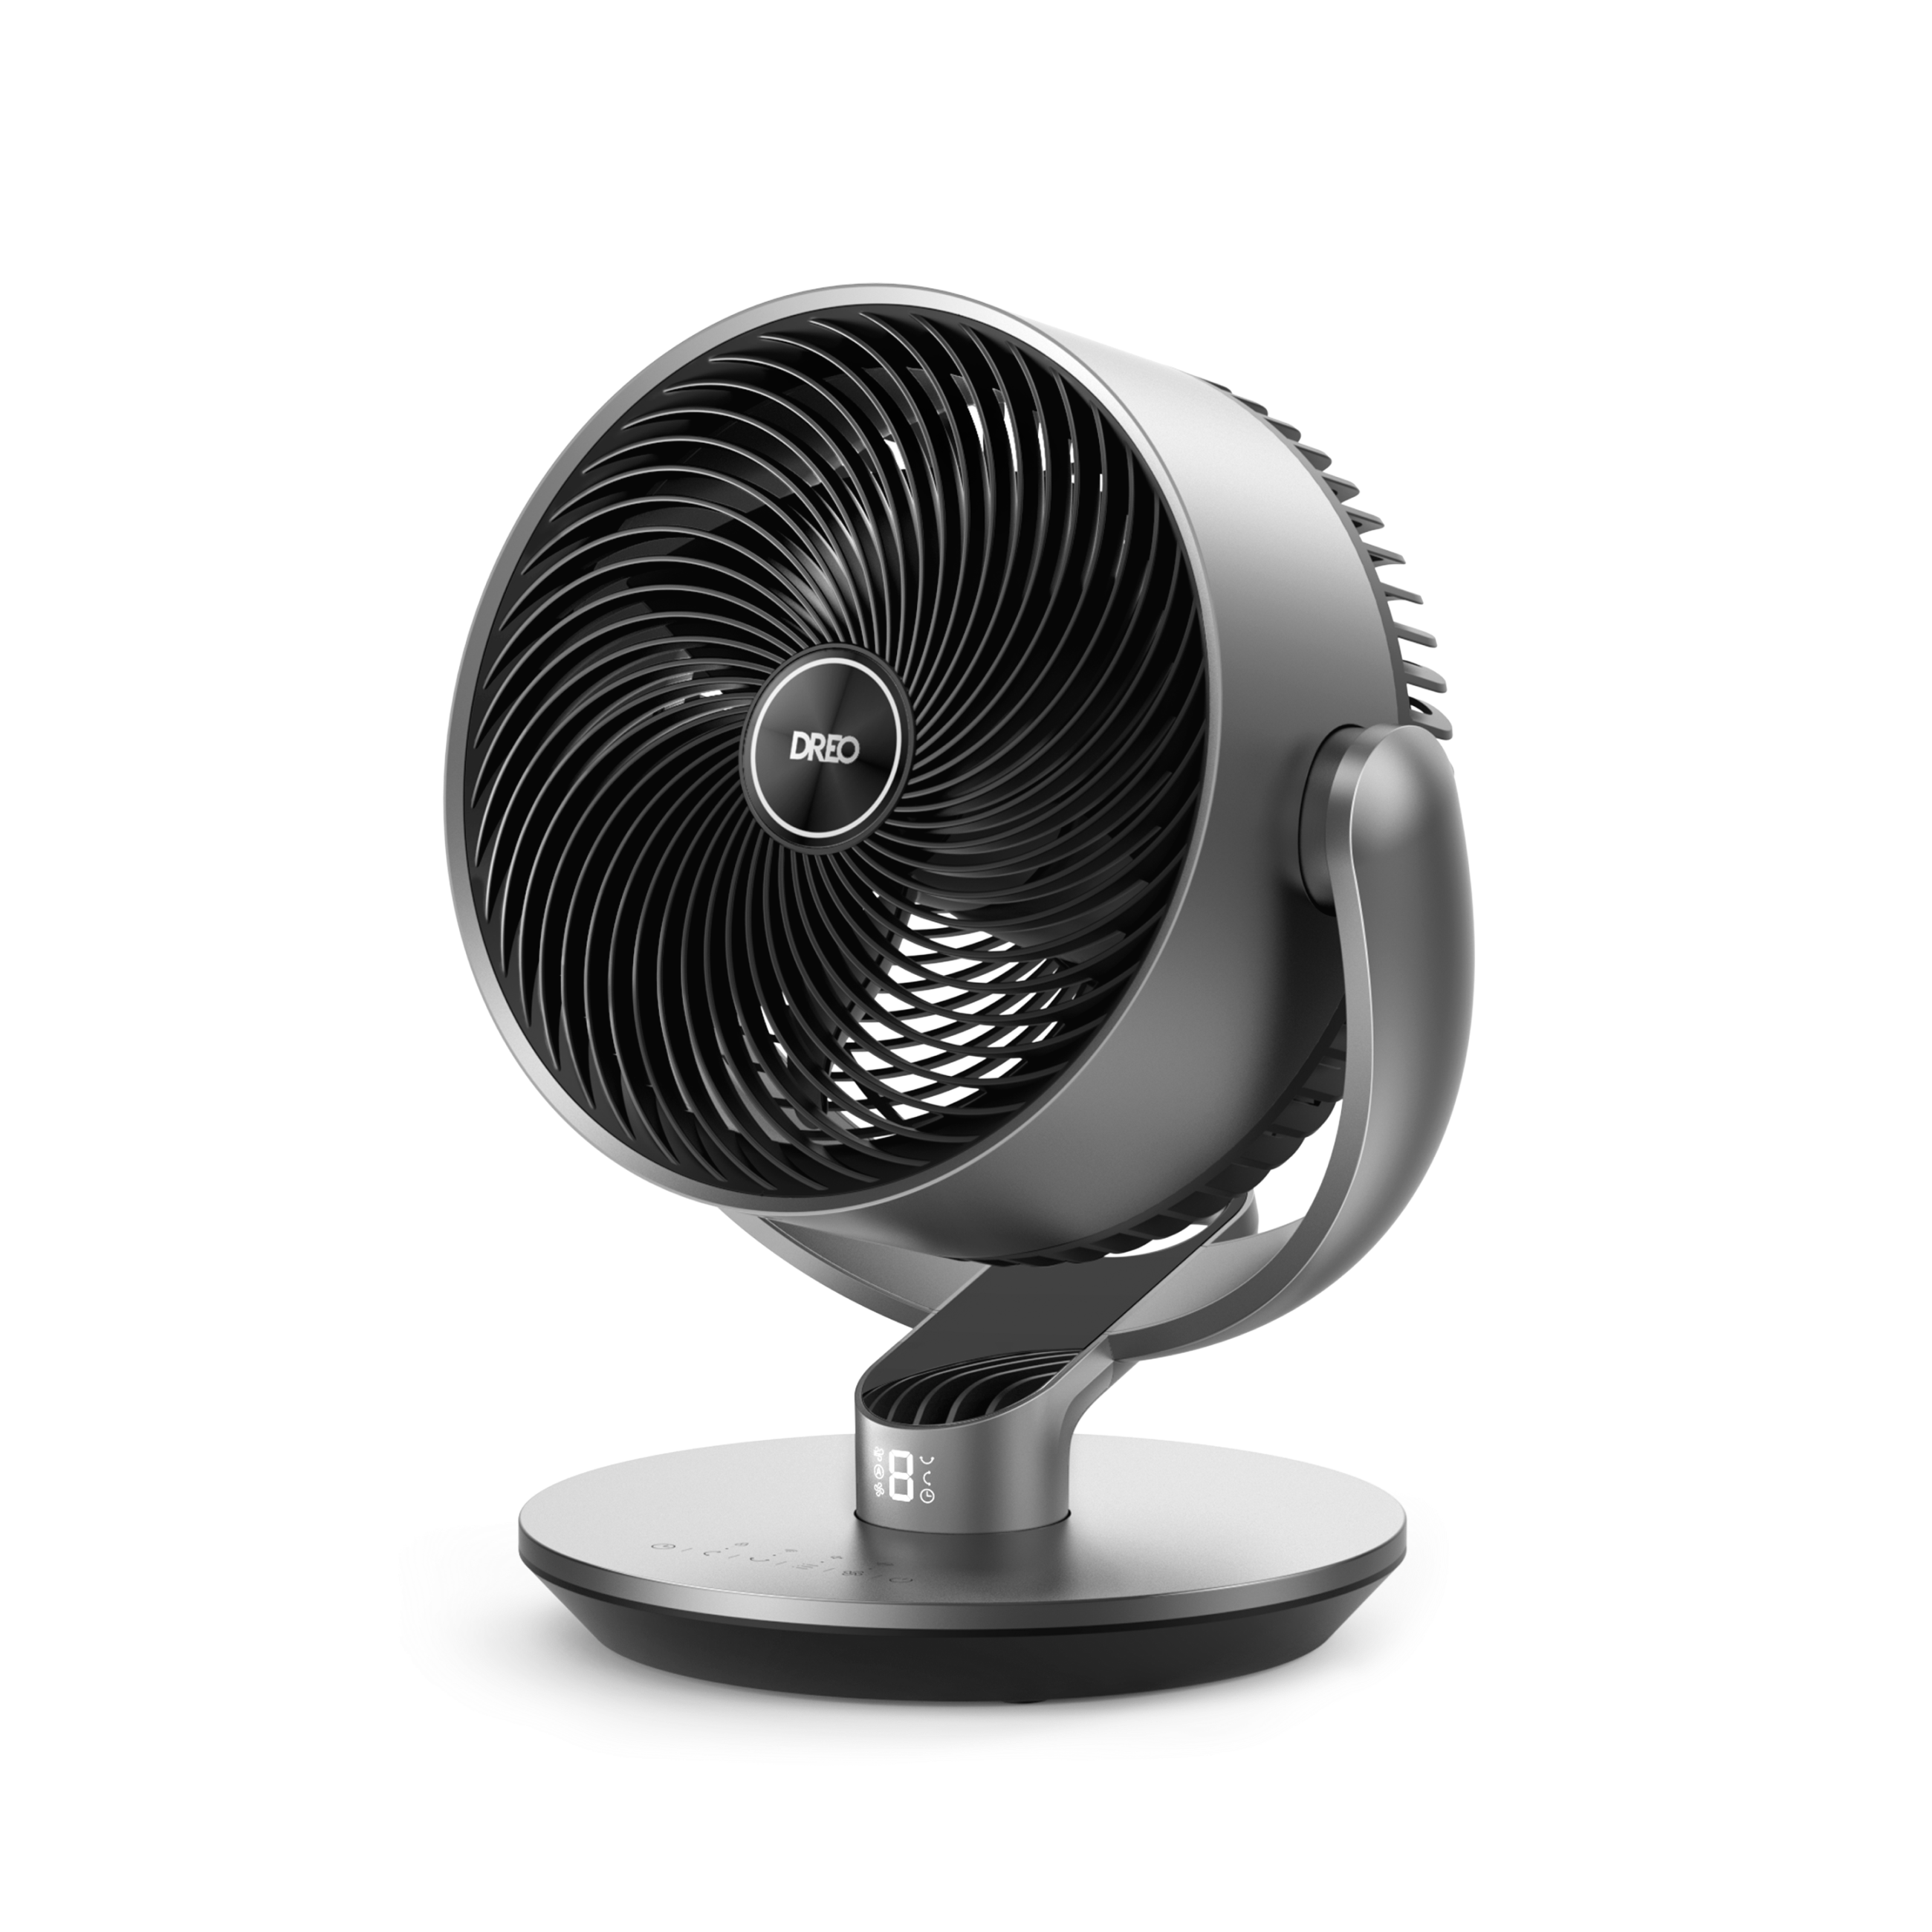 Dreo Smart Fans for Home, 110ft Air Circulator, 120°+90° Oscillating Fans with WiFi/Voice Control, 9 Speeds, 25dB DC Quiet Fan, 6 Modes, 12H Timer, Works with Alexa/Google, 16" Table Fan for Bedroom.